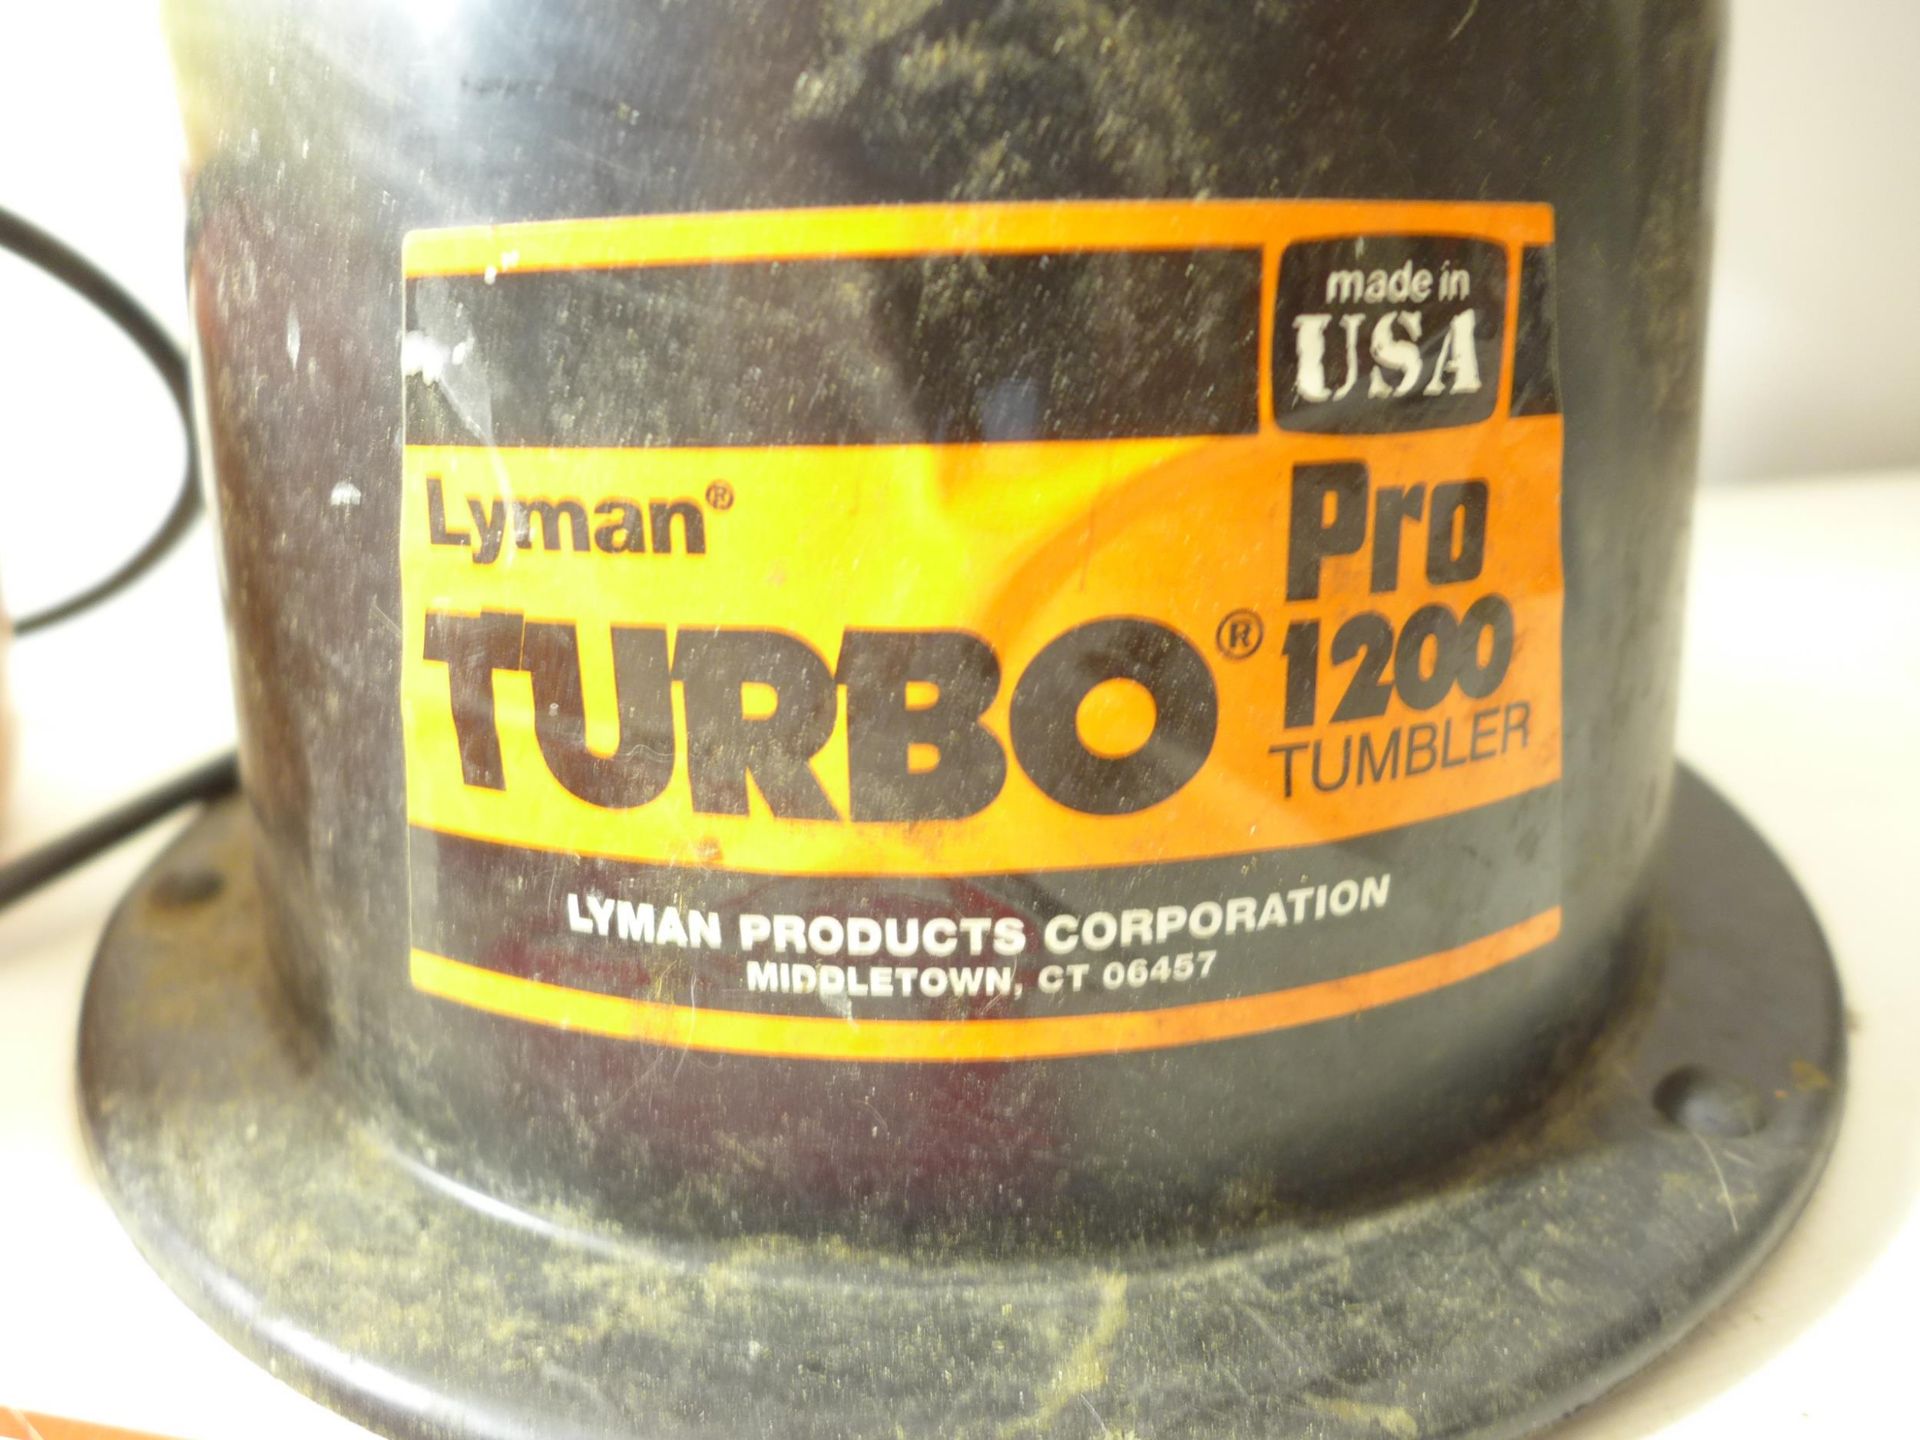 A LYMAN TURBO PRO 1200 BULLET CASE TUMBLER (WORKING WHEN CATALOGUED) TIN OF LEAD BULLETS AND BOX - Image 3 of 3